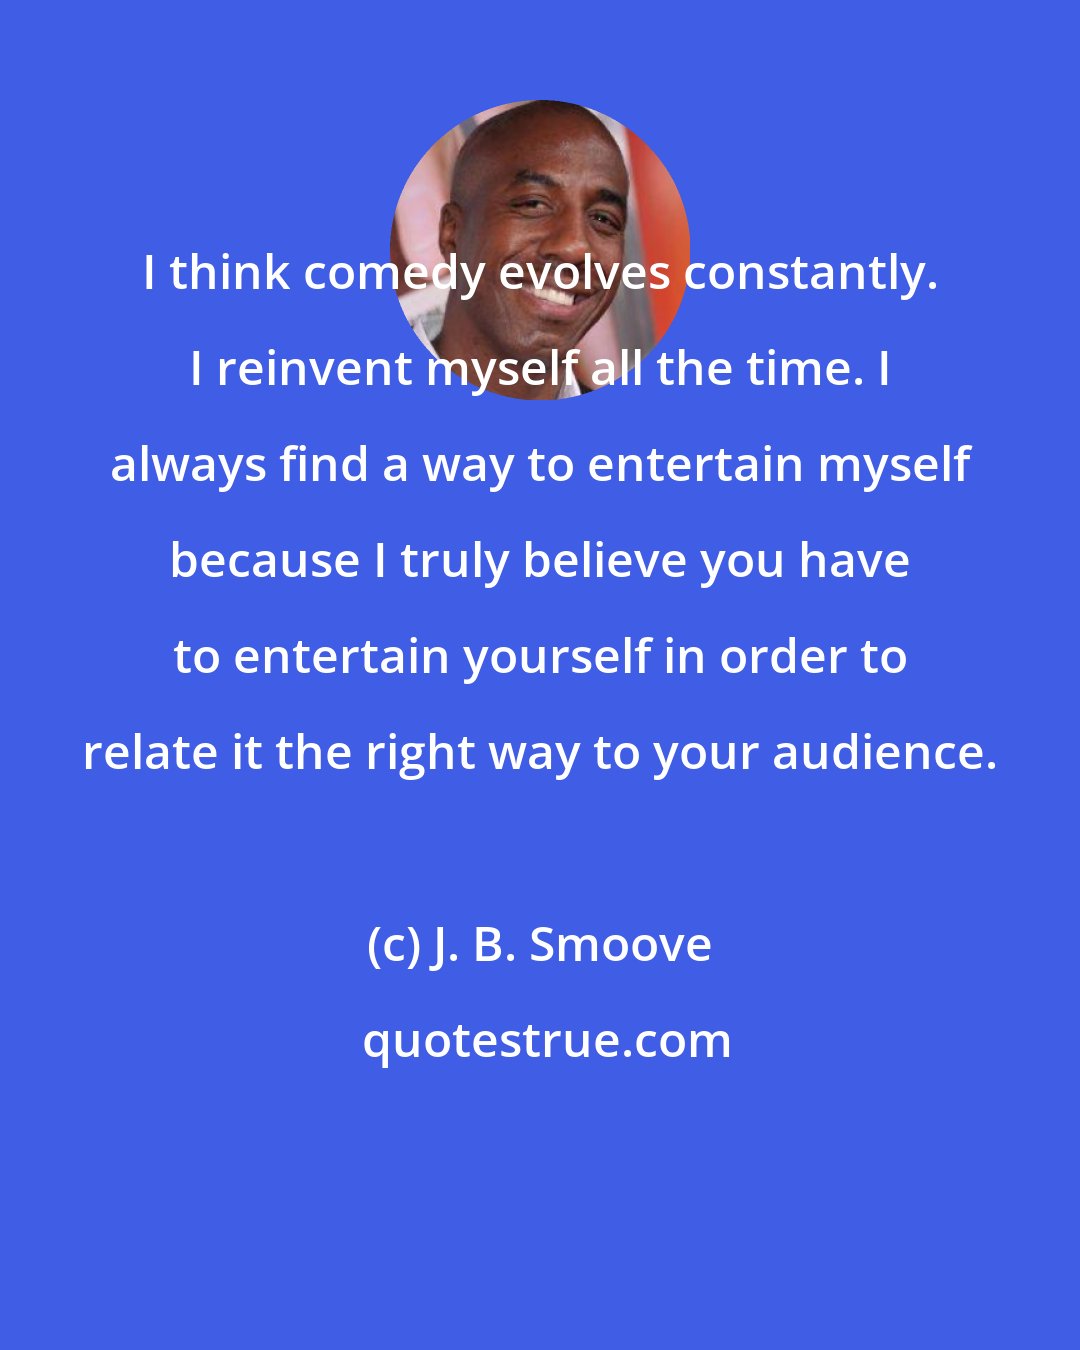 J. B. Smoove: I think comedy evolves constantly. I reinvent myself all the time. I always find a way to entertain myself because I truly believe you have to entertain yourself in order to relate it the right way to your audience.